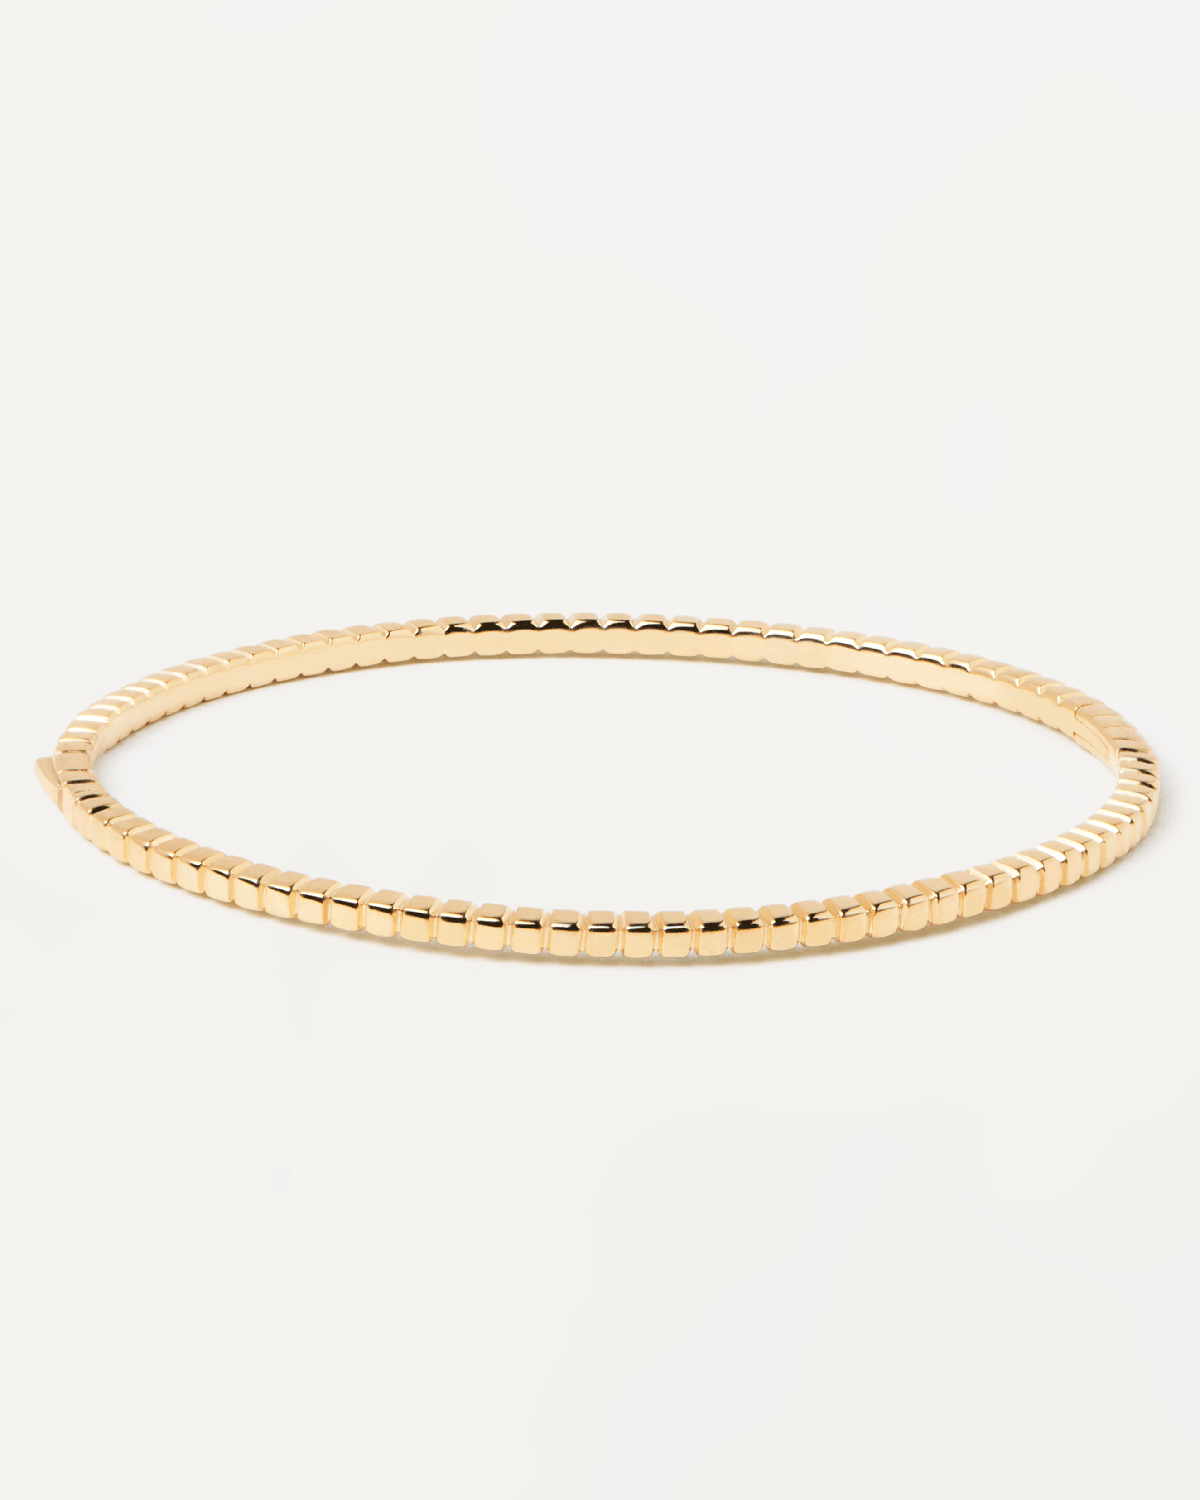 2023 Selection | Lea Bangle. Textured hinged rigid bracelet in gold-plated silver. Get the latest arrival from PDPAOLA. Place your order safely and get this Best Seller. Free Shipping.